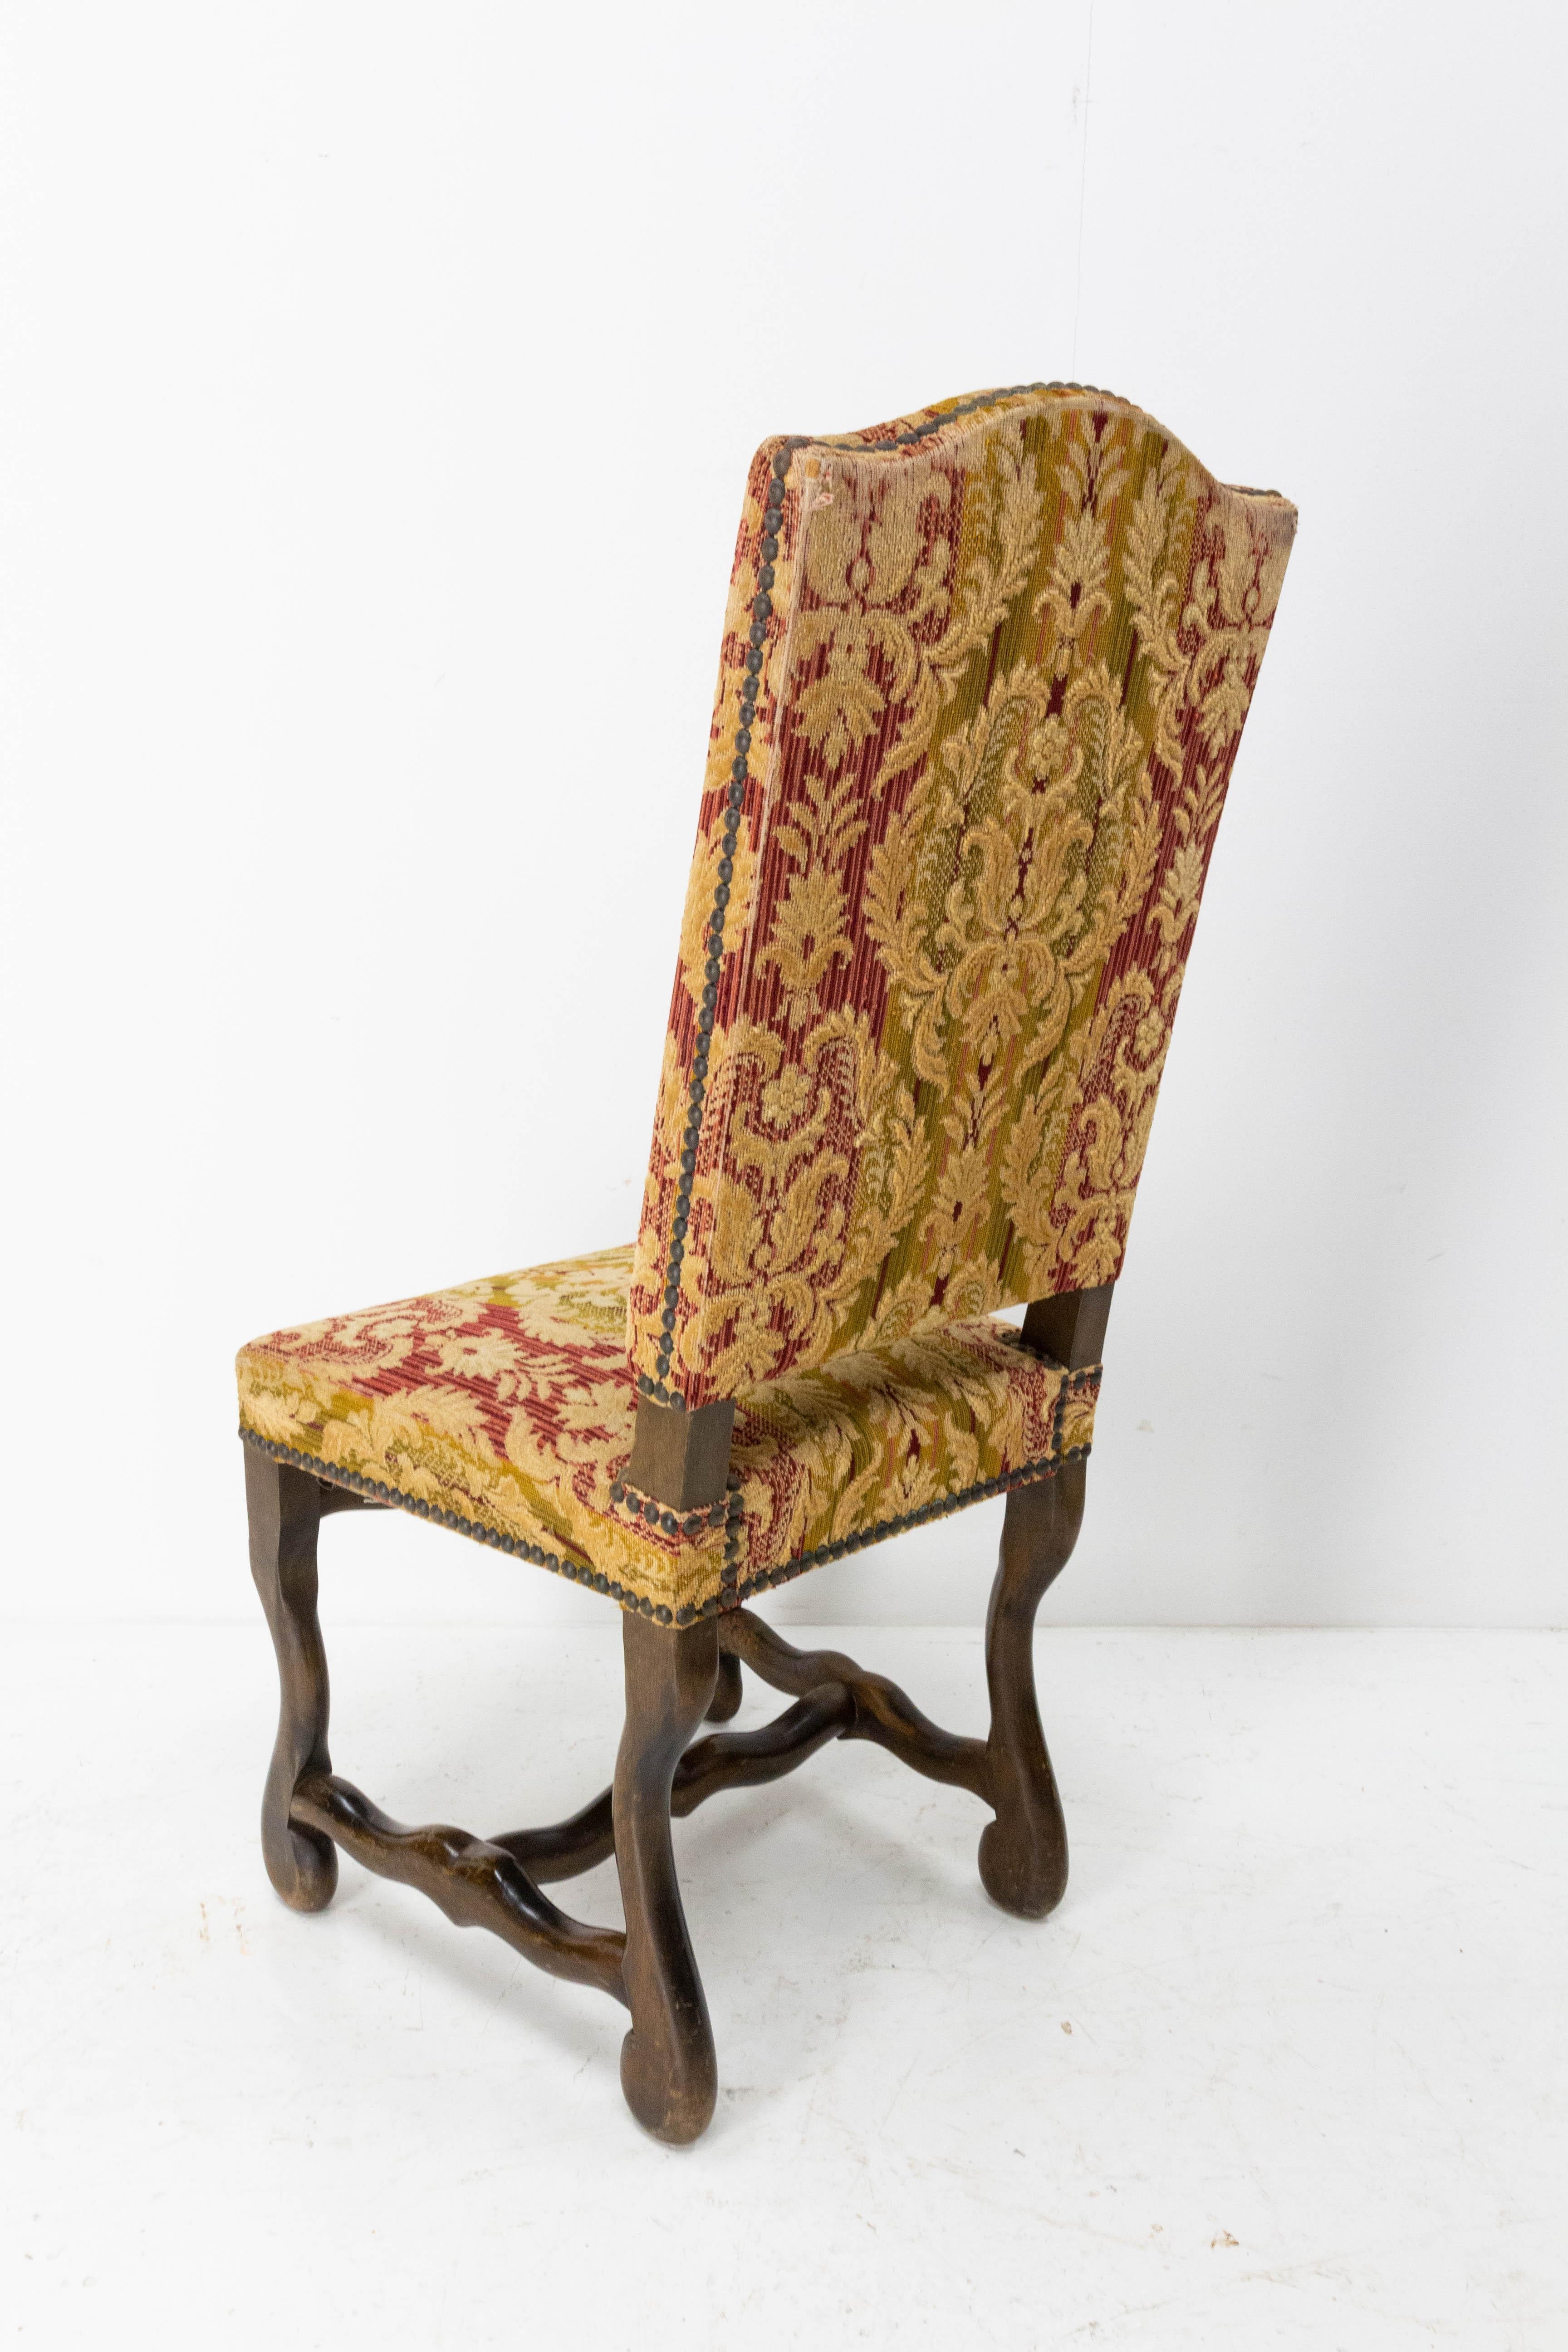 Upholstery Eight French Dining Chairs Beech Os de Mouton Louis XIII Style, circa 1960 For Sale